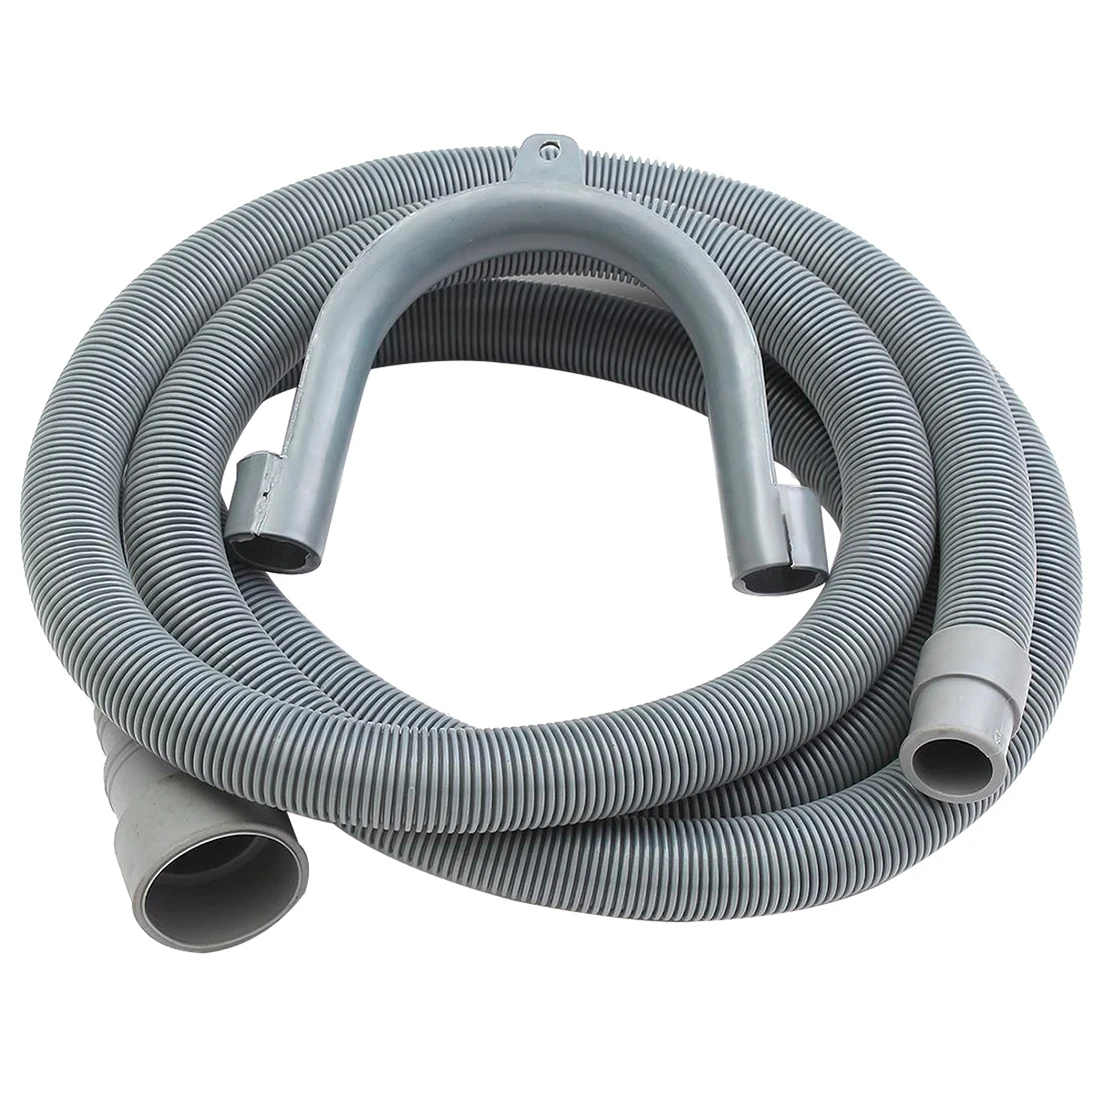 Drain Hose Extension Washing Pipe With Bracket Set Home Univ